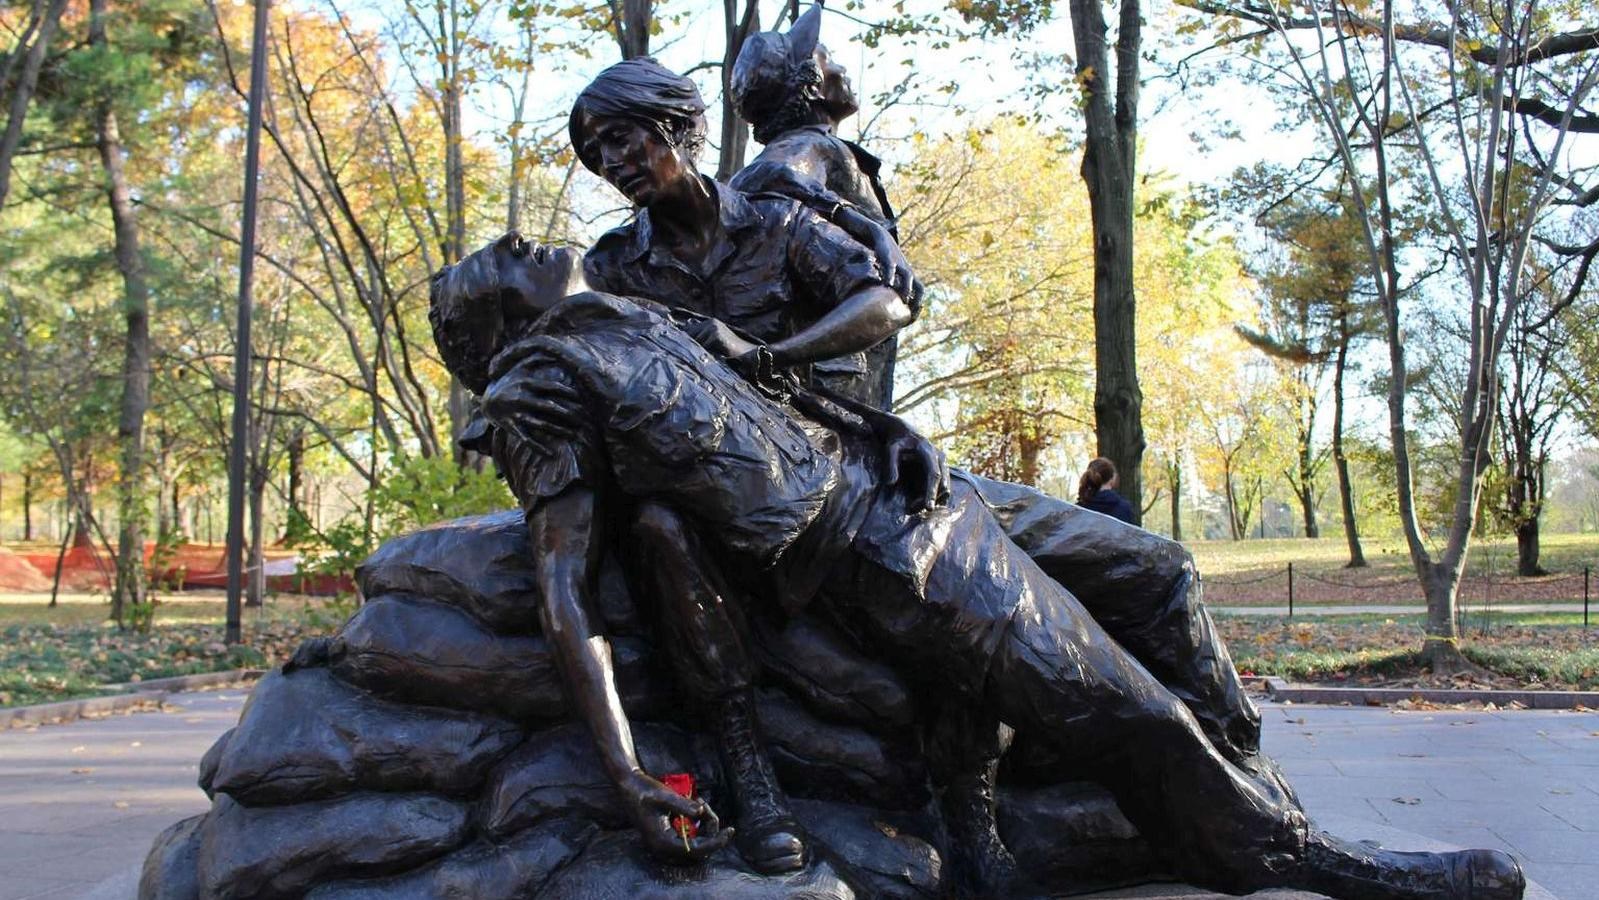 Statue of women caring for a fallen soldier.